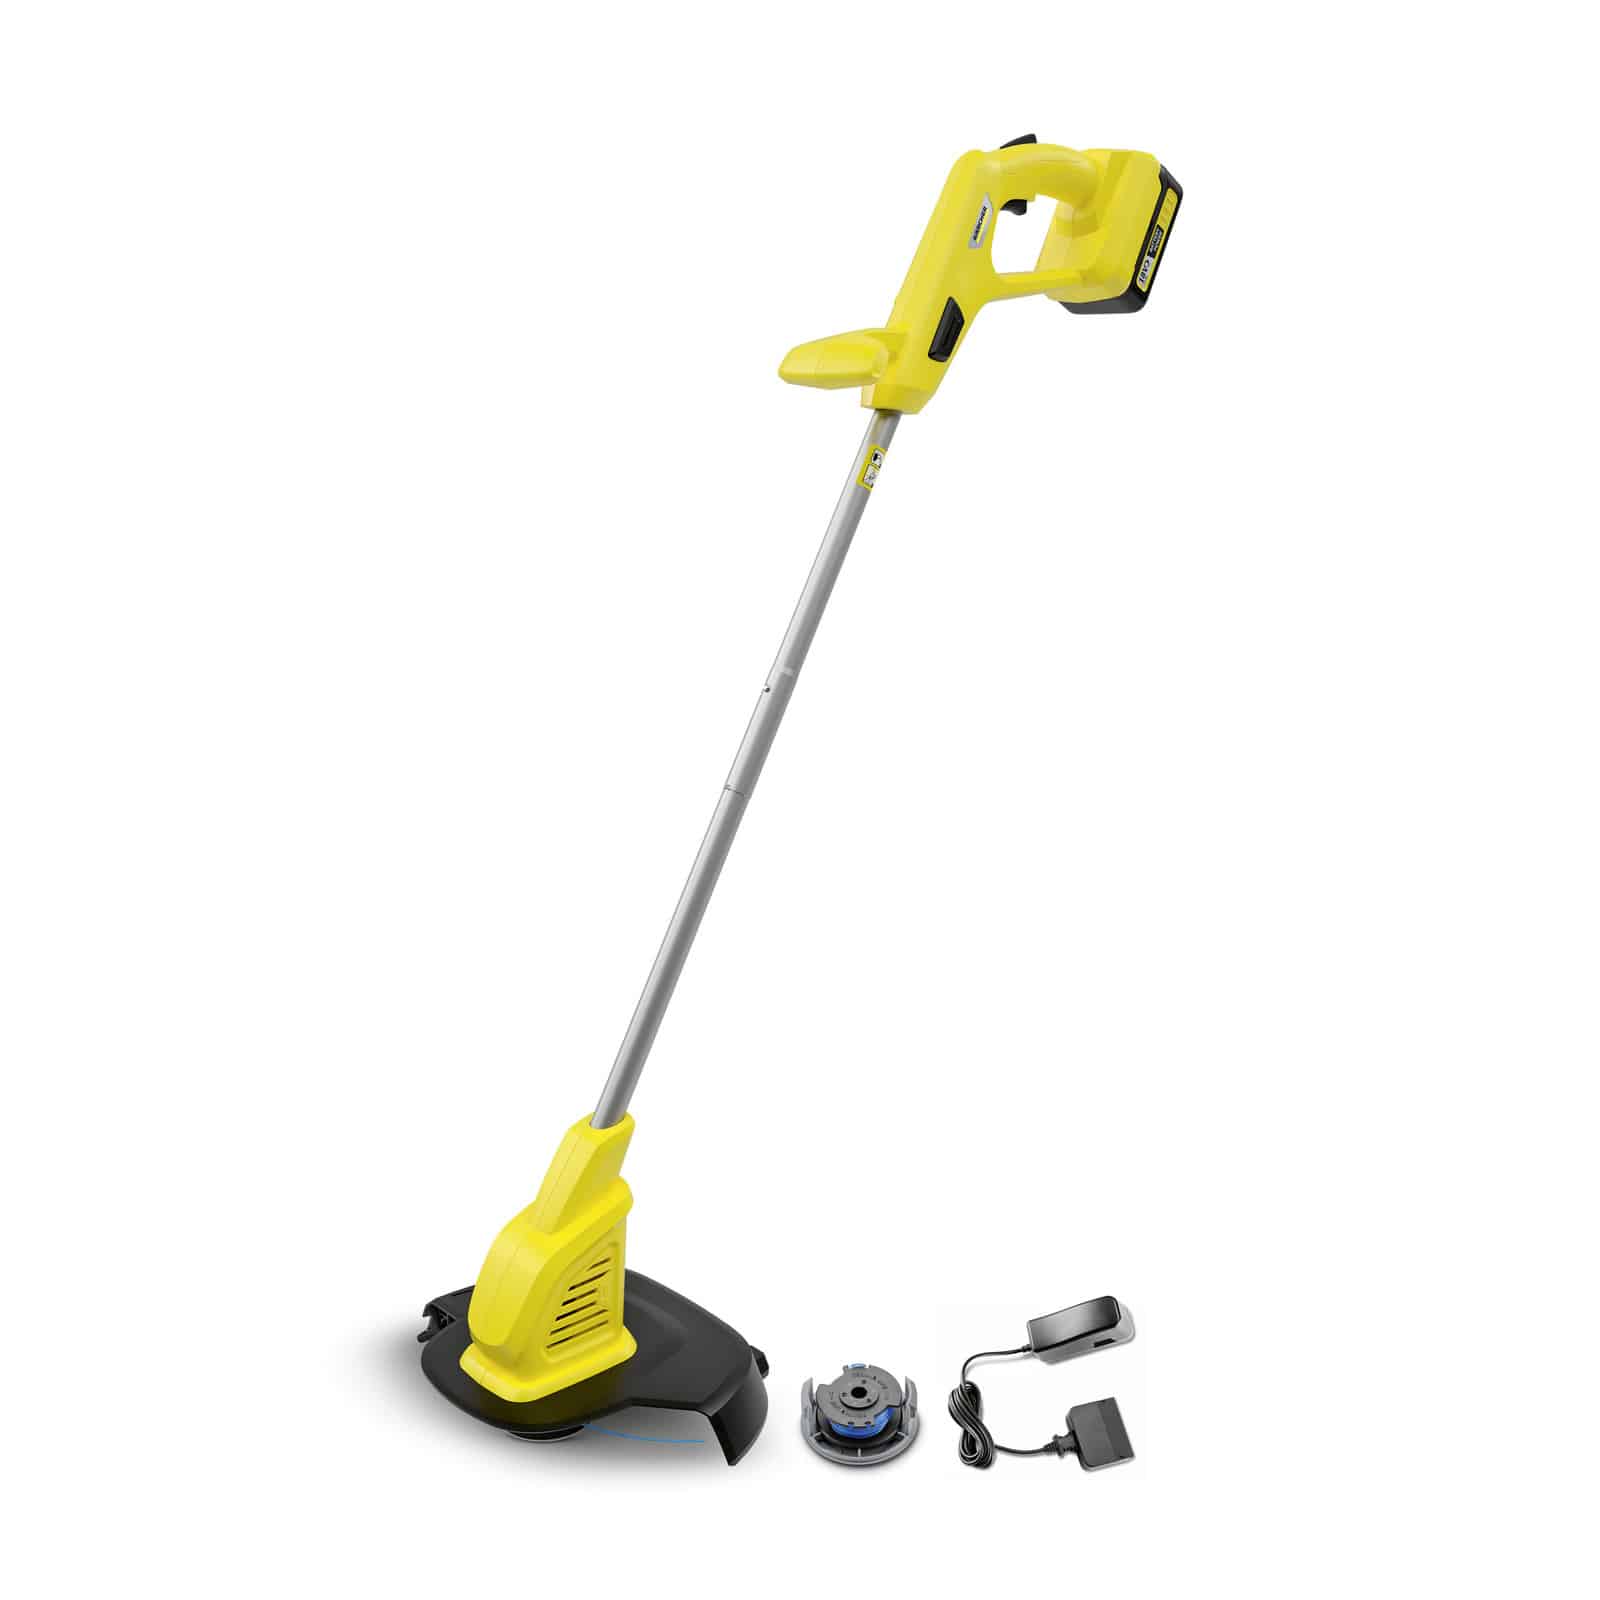 LTR Cordless Lawn Trimmer